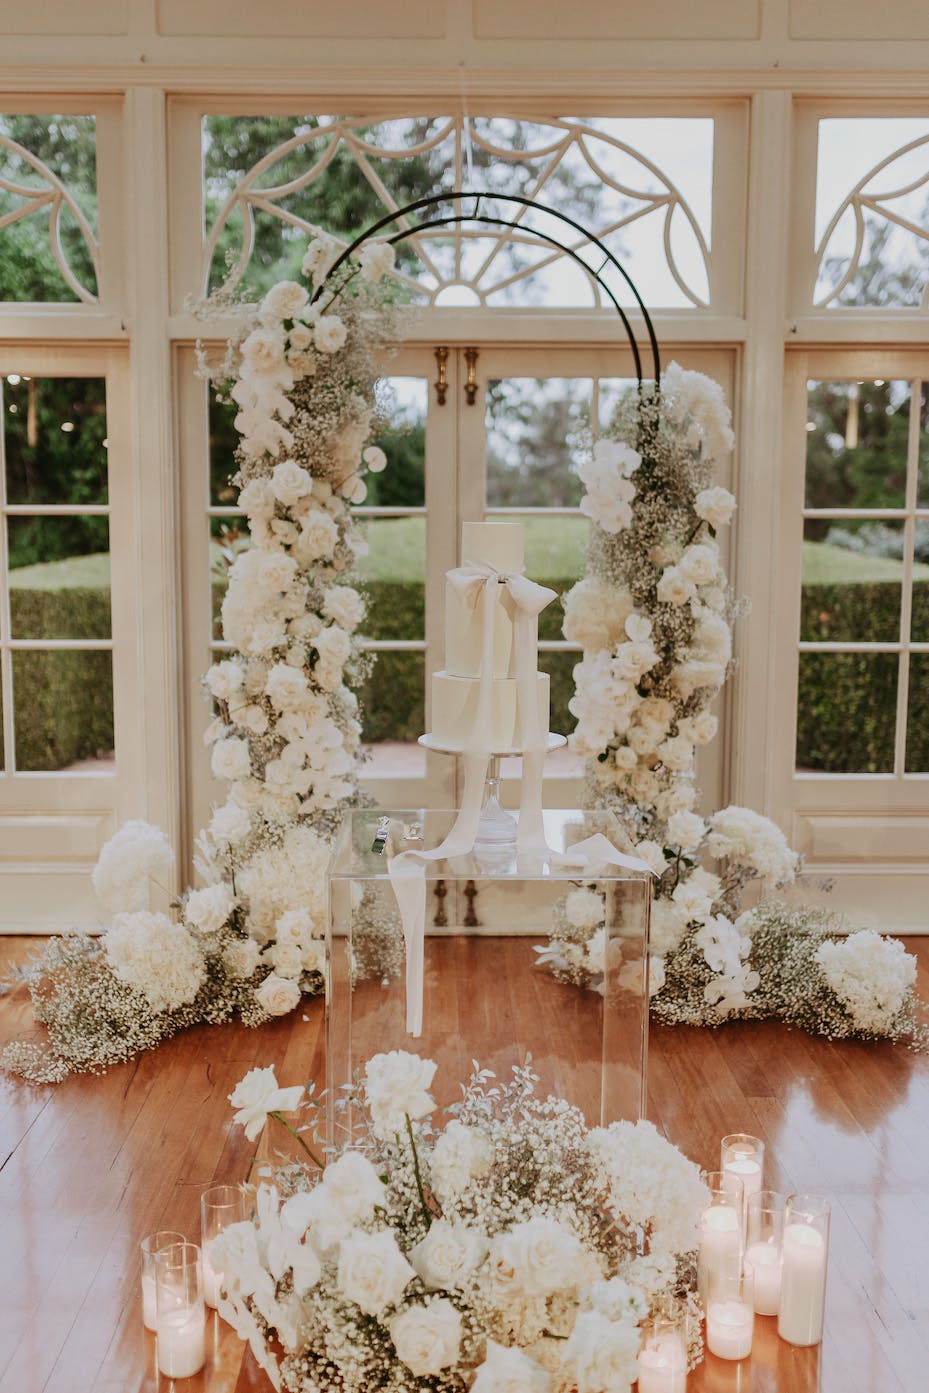 A wedding altar adorned with white and ivory flowers, including roses and baby's breath, arranged in tall, curved structures on both sides. A three-tiered white wedding cake sits on a glass stand in the center, with lit candles on the wooden floor.